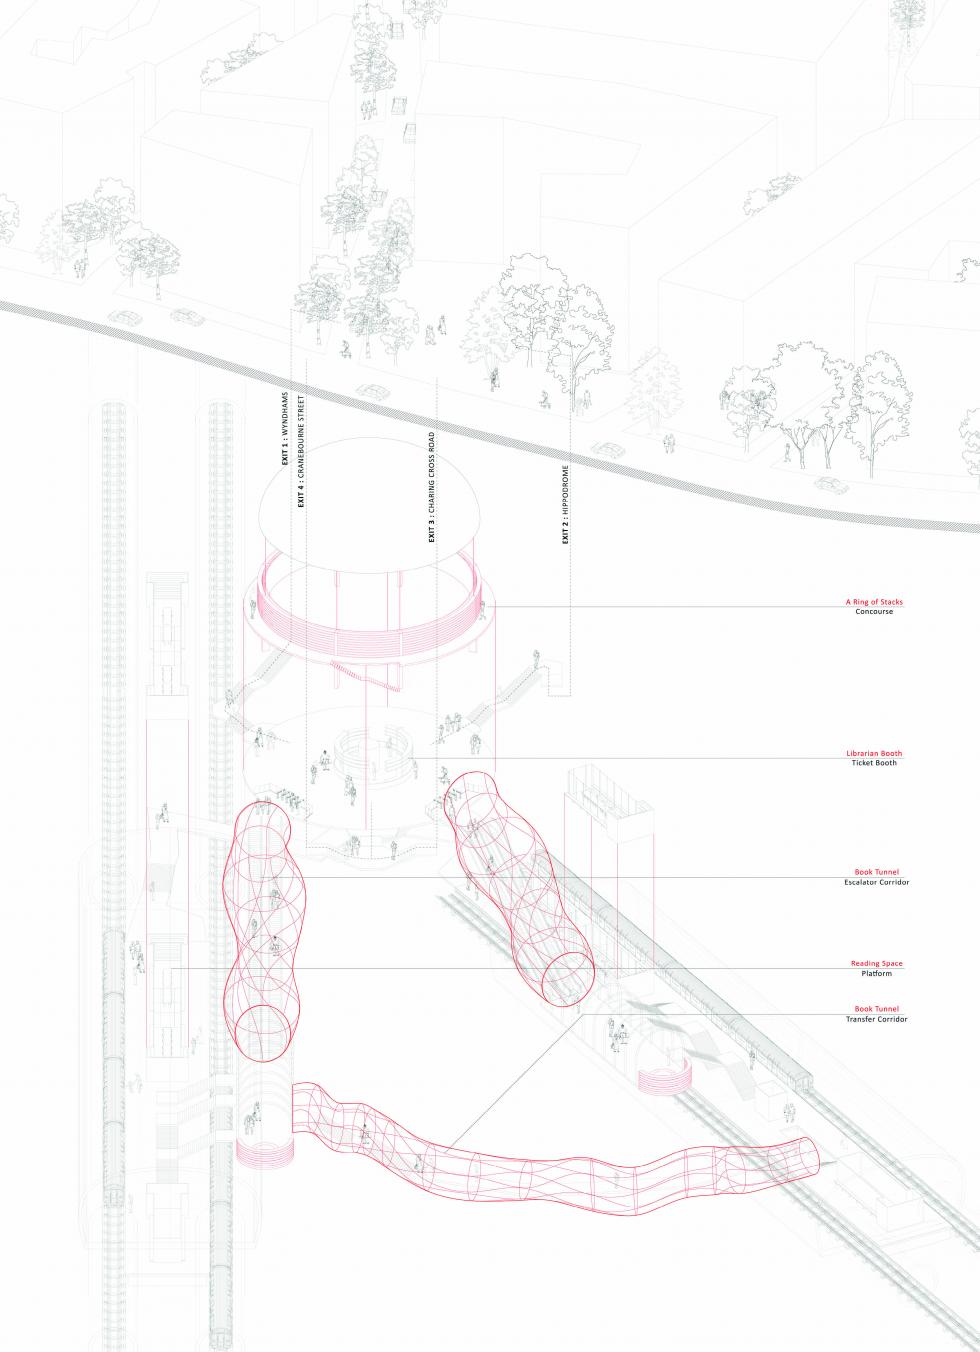 Drawing is showing the circulation of the subway tunnels in pink